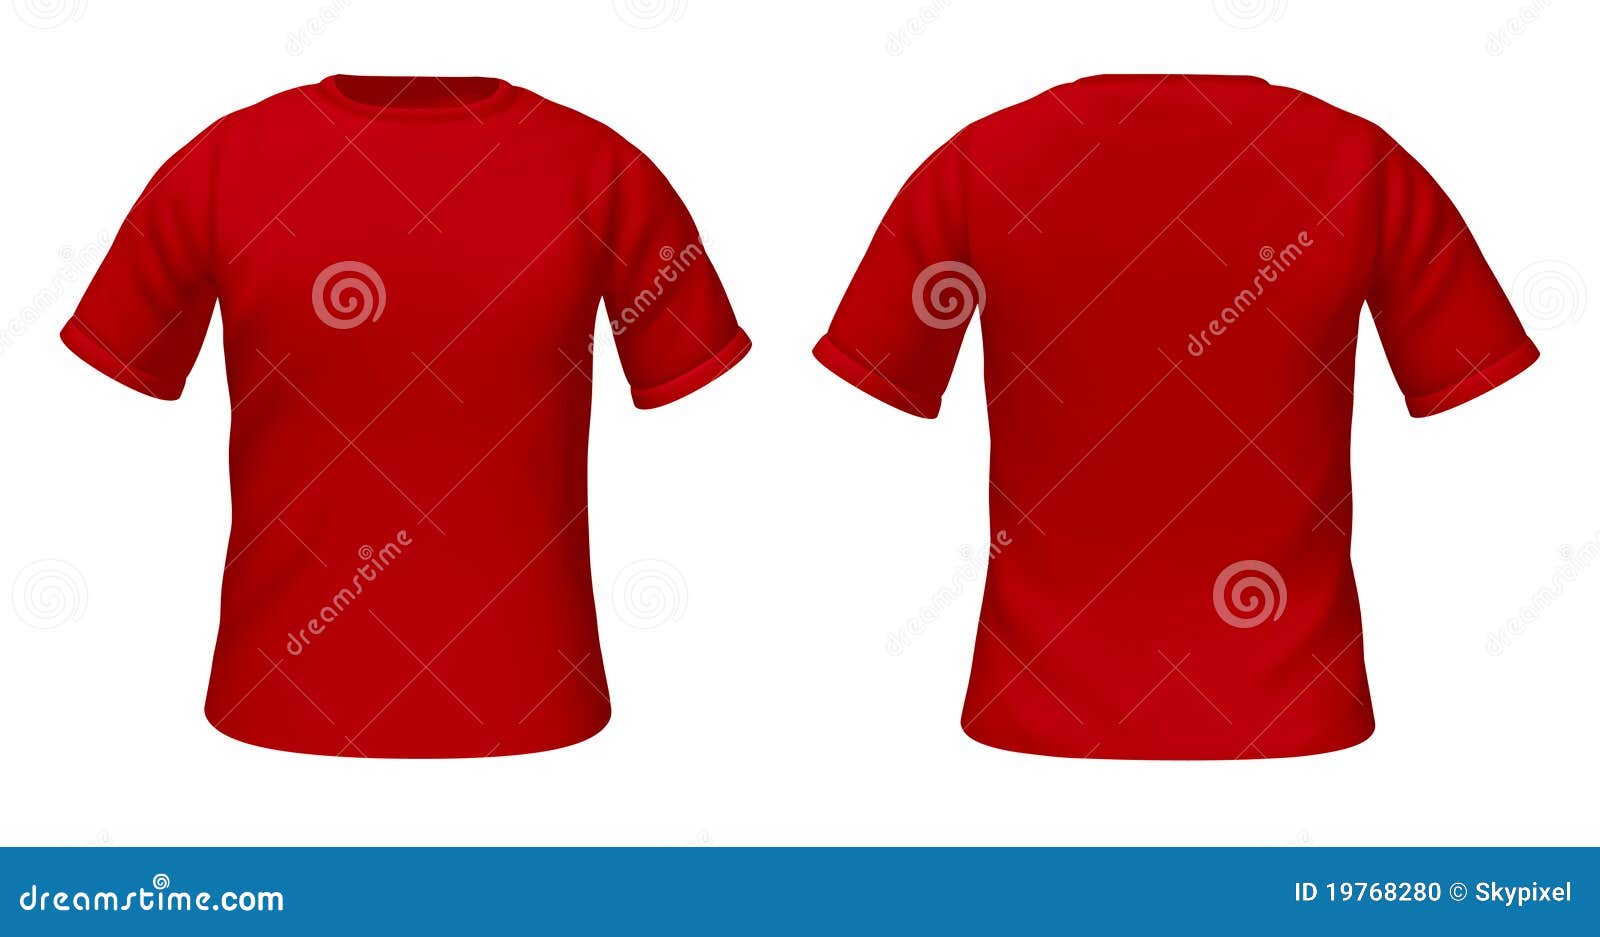 Download Blank T-shirts Template With Red Color Stock Illustration ...